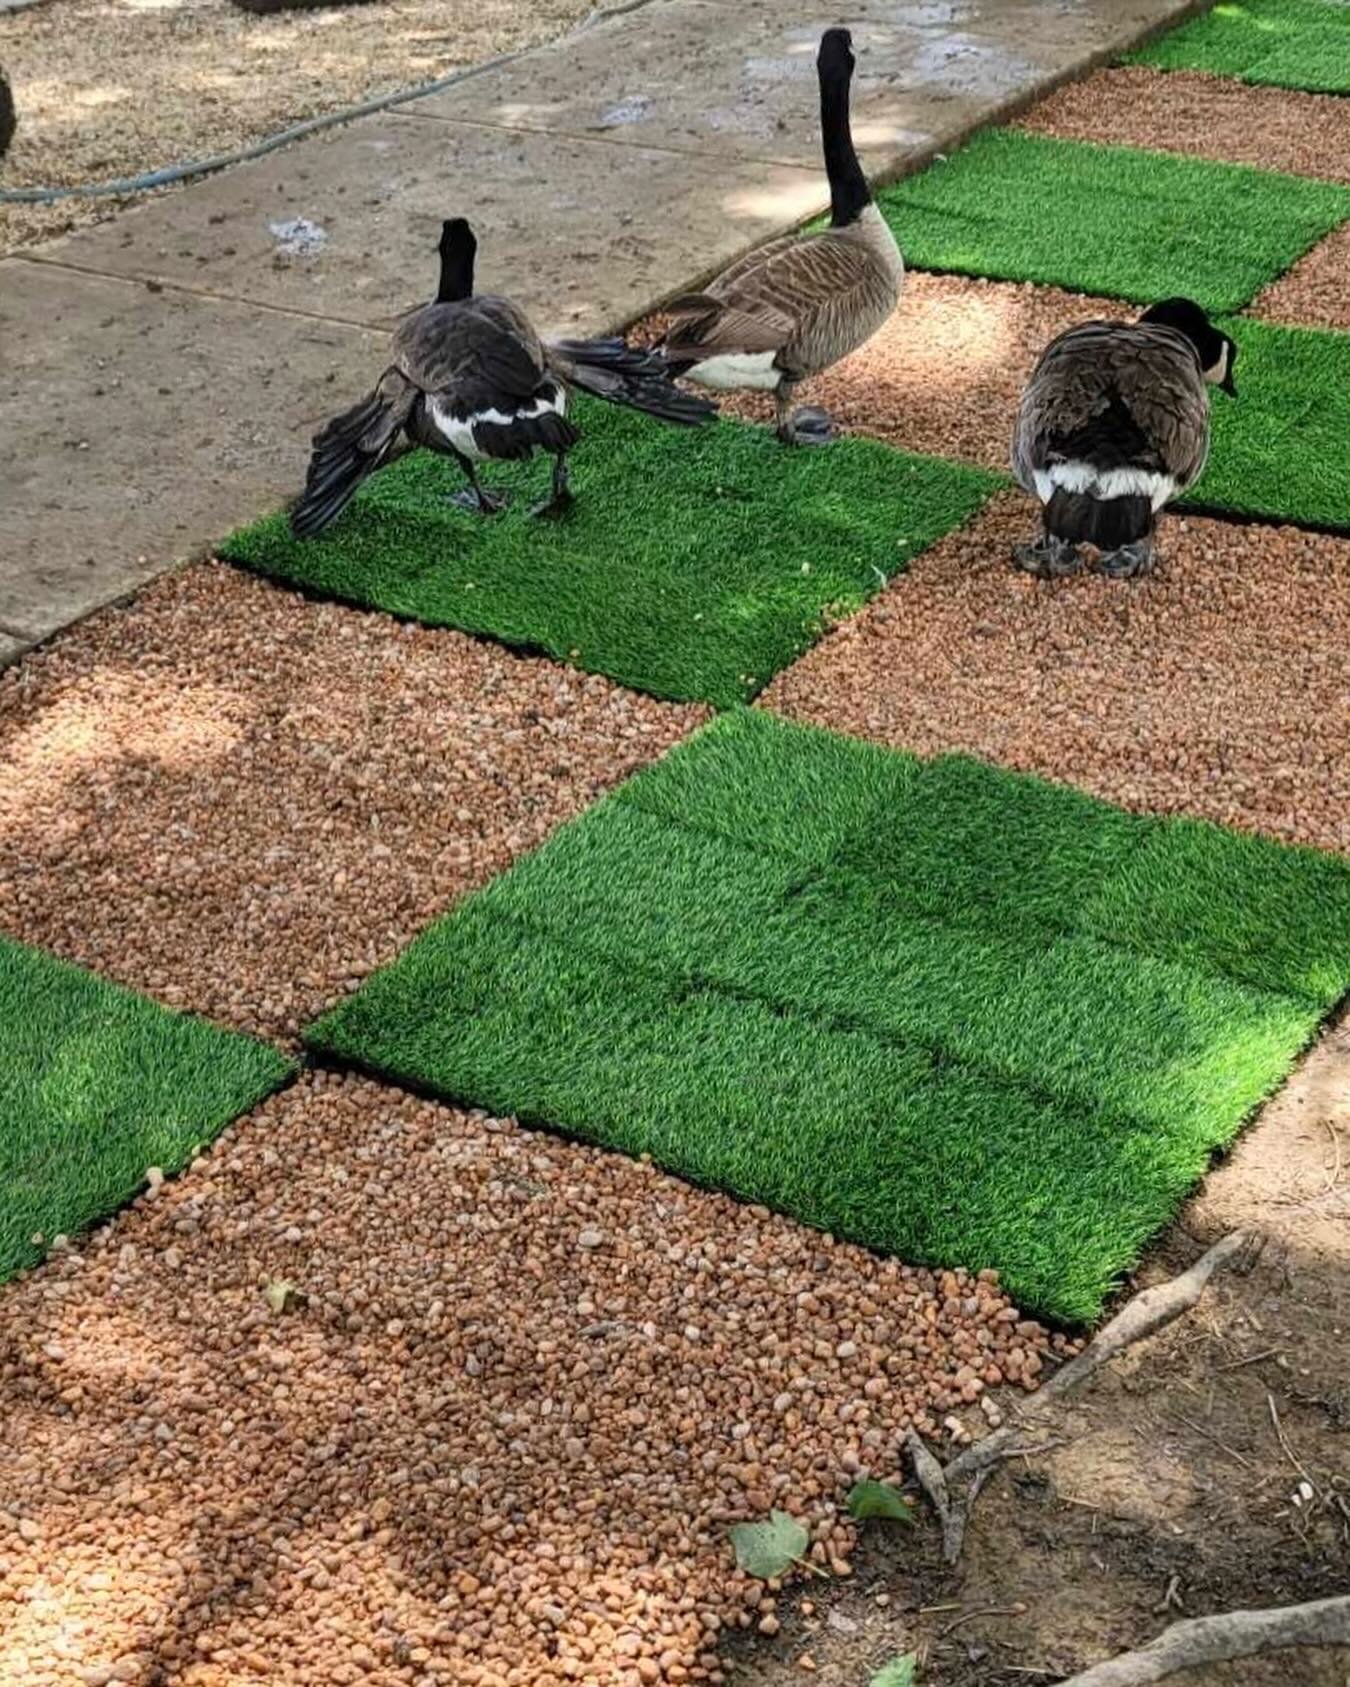 🌿🦆 Help us pave the way for #happyfeet! Carolina Waterfowl Rescue is in need of pea gravel #donations for our #groundscaping projects. Pea gravel helps improve drainage, reduces mud, and provides a clean surface for our #rescuedwaterfowl. Your dona